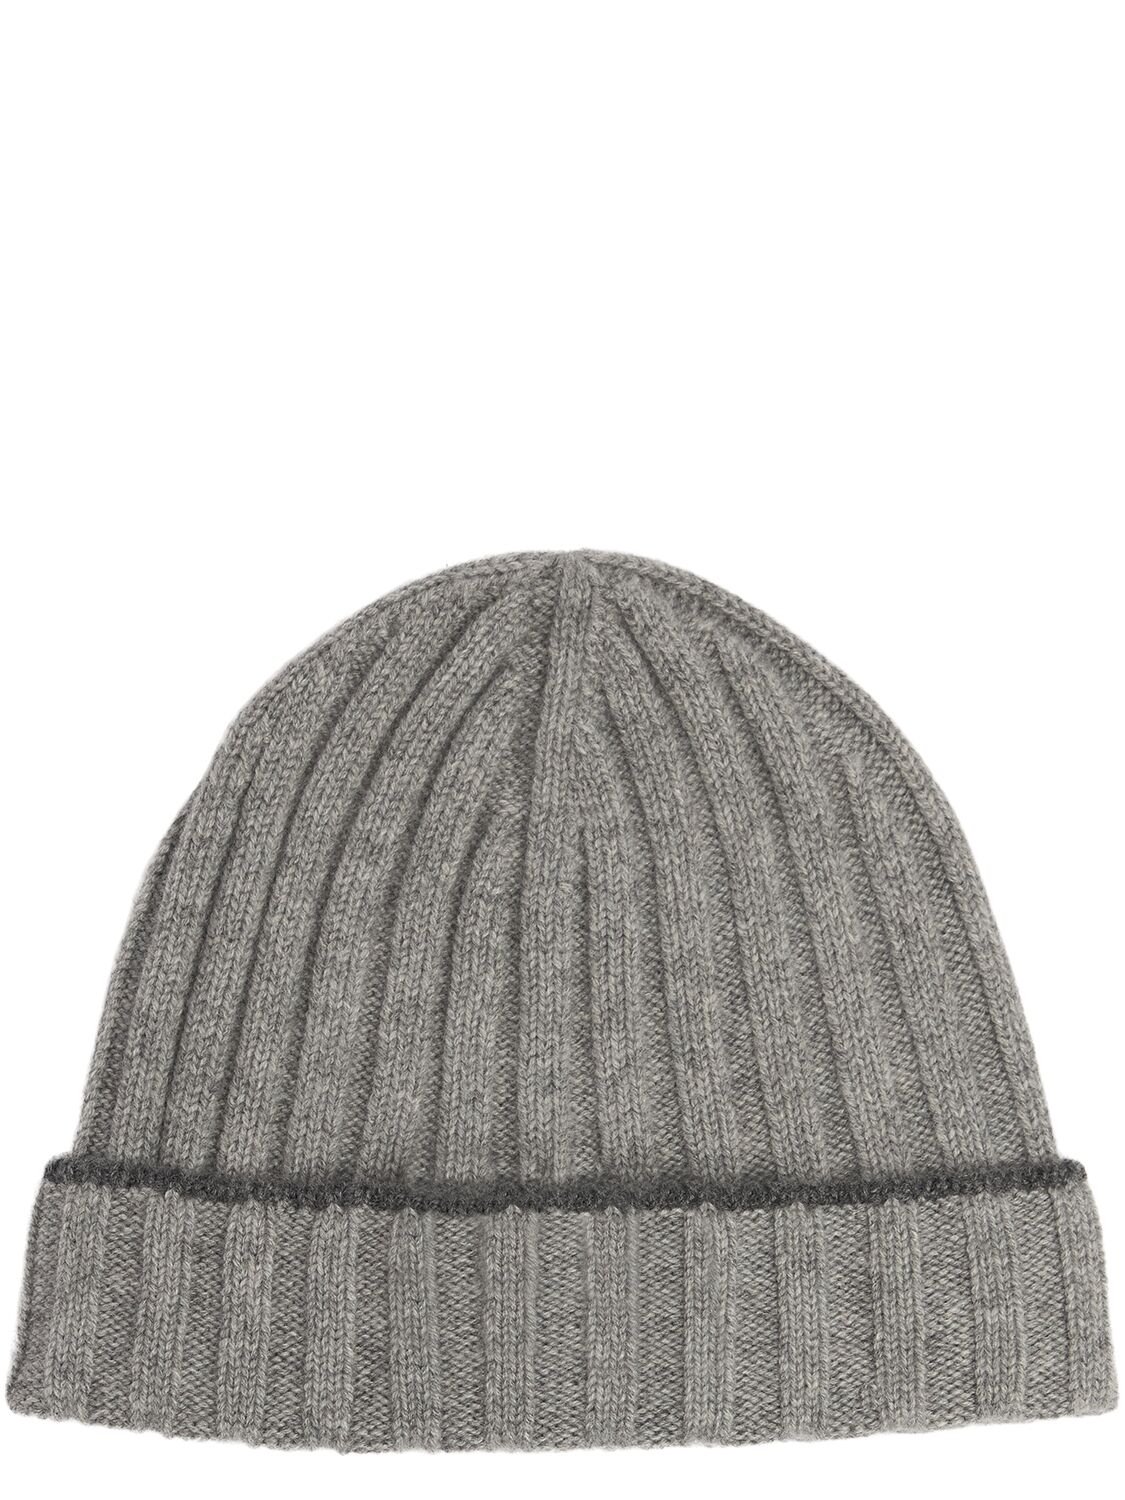 Brunello Cucinelli Cashmere Ribbed Knit Beanie Hat In Grey,piombo